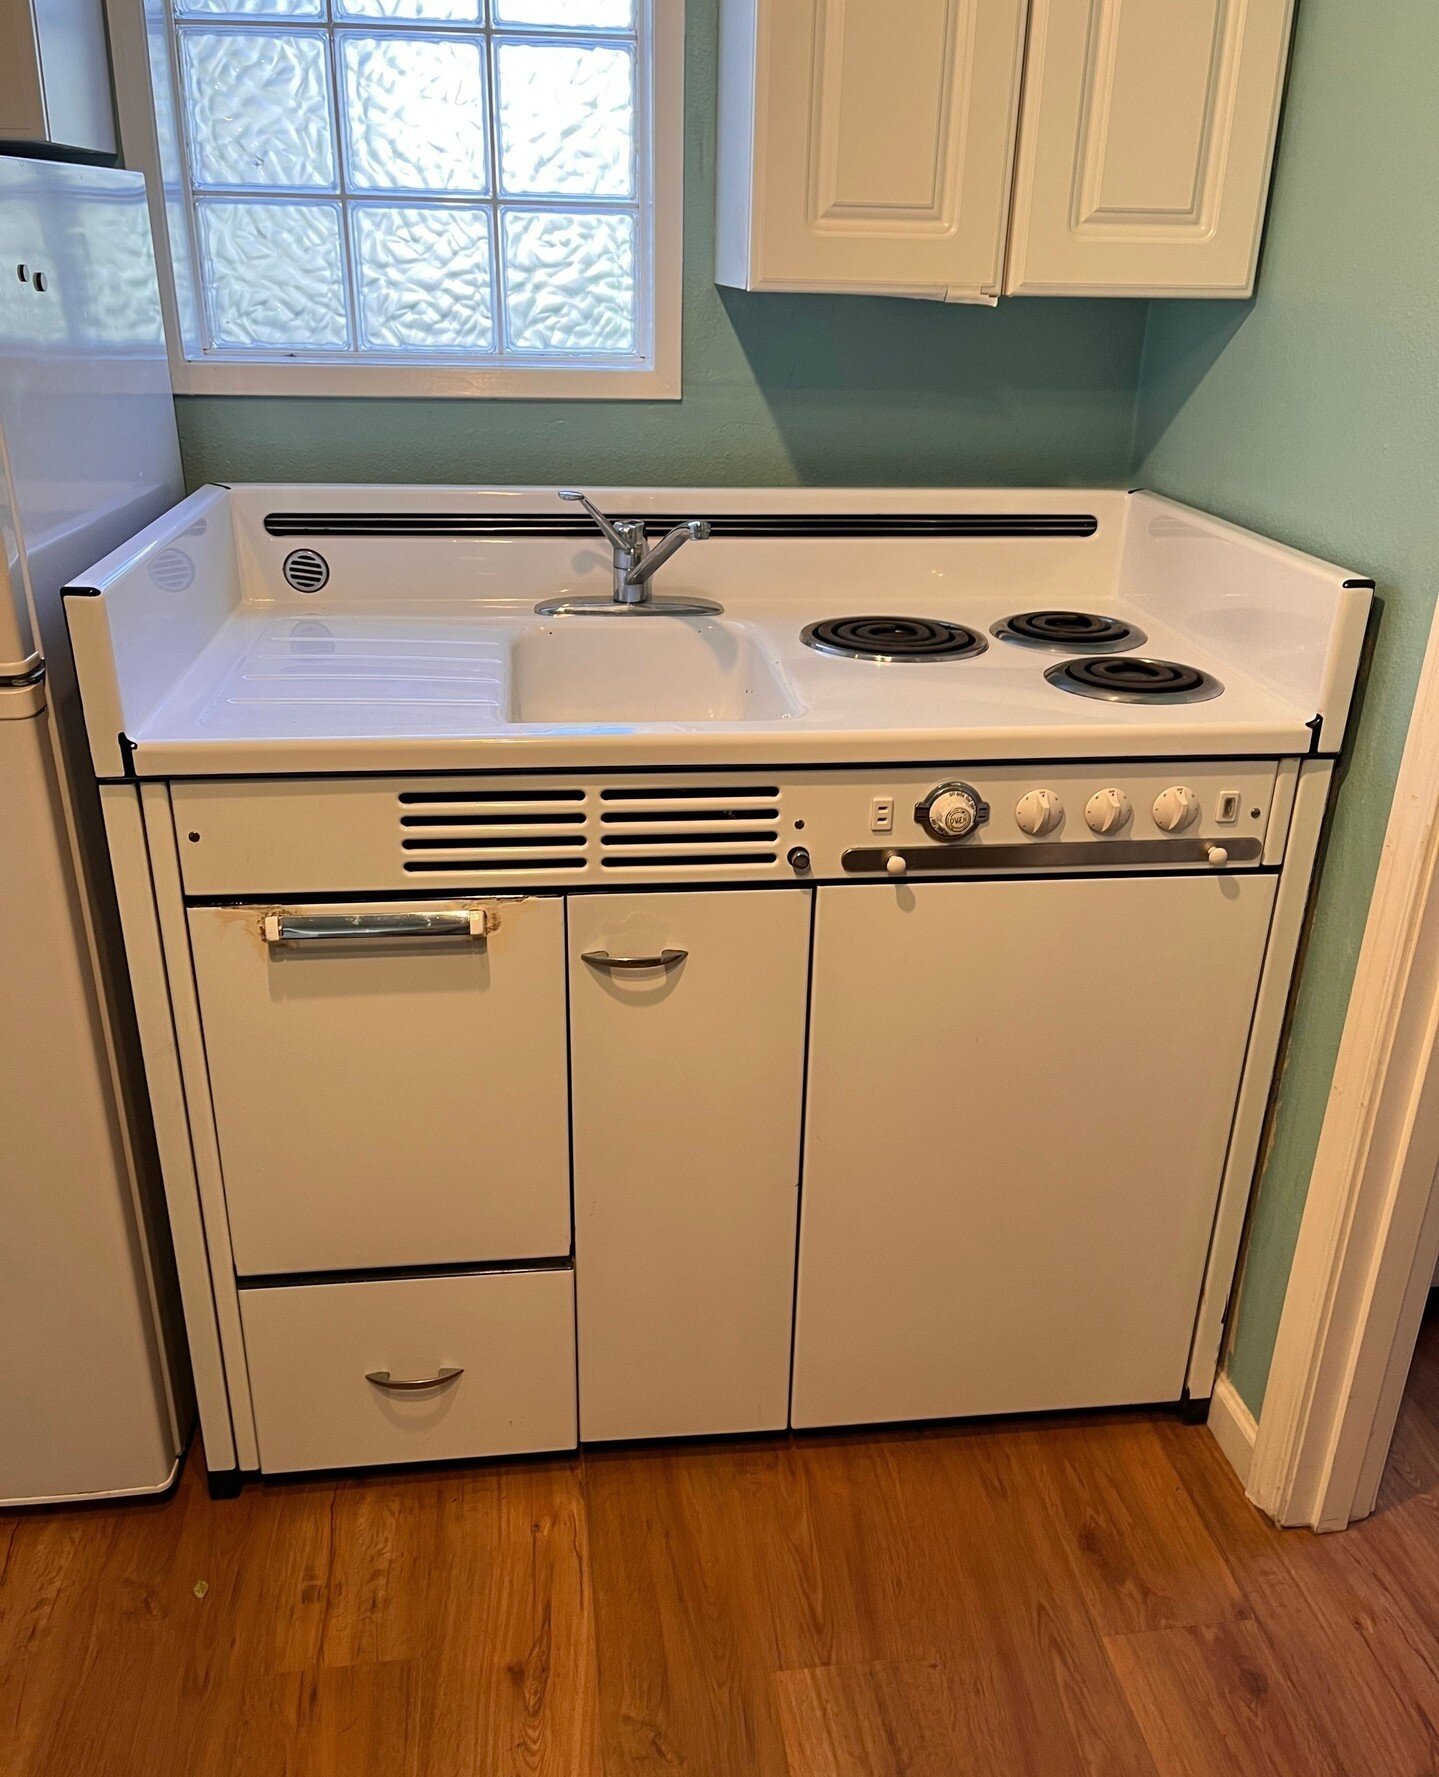 Look at this darling contraption! ⁠
⁠
It is a sink, drain board, three burner stove top, and an oven all in one compact unit.  I LOVE it!⁠
⁠
⁠
#retro #vintage #allinone #milunit #forsale #eugene #oregon #toocute